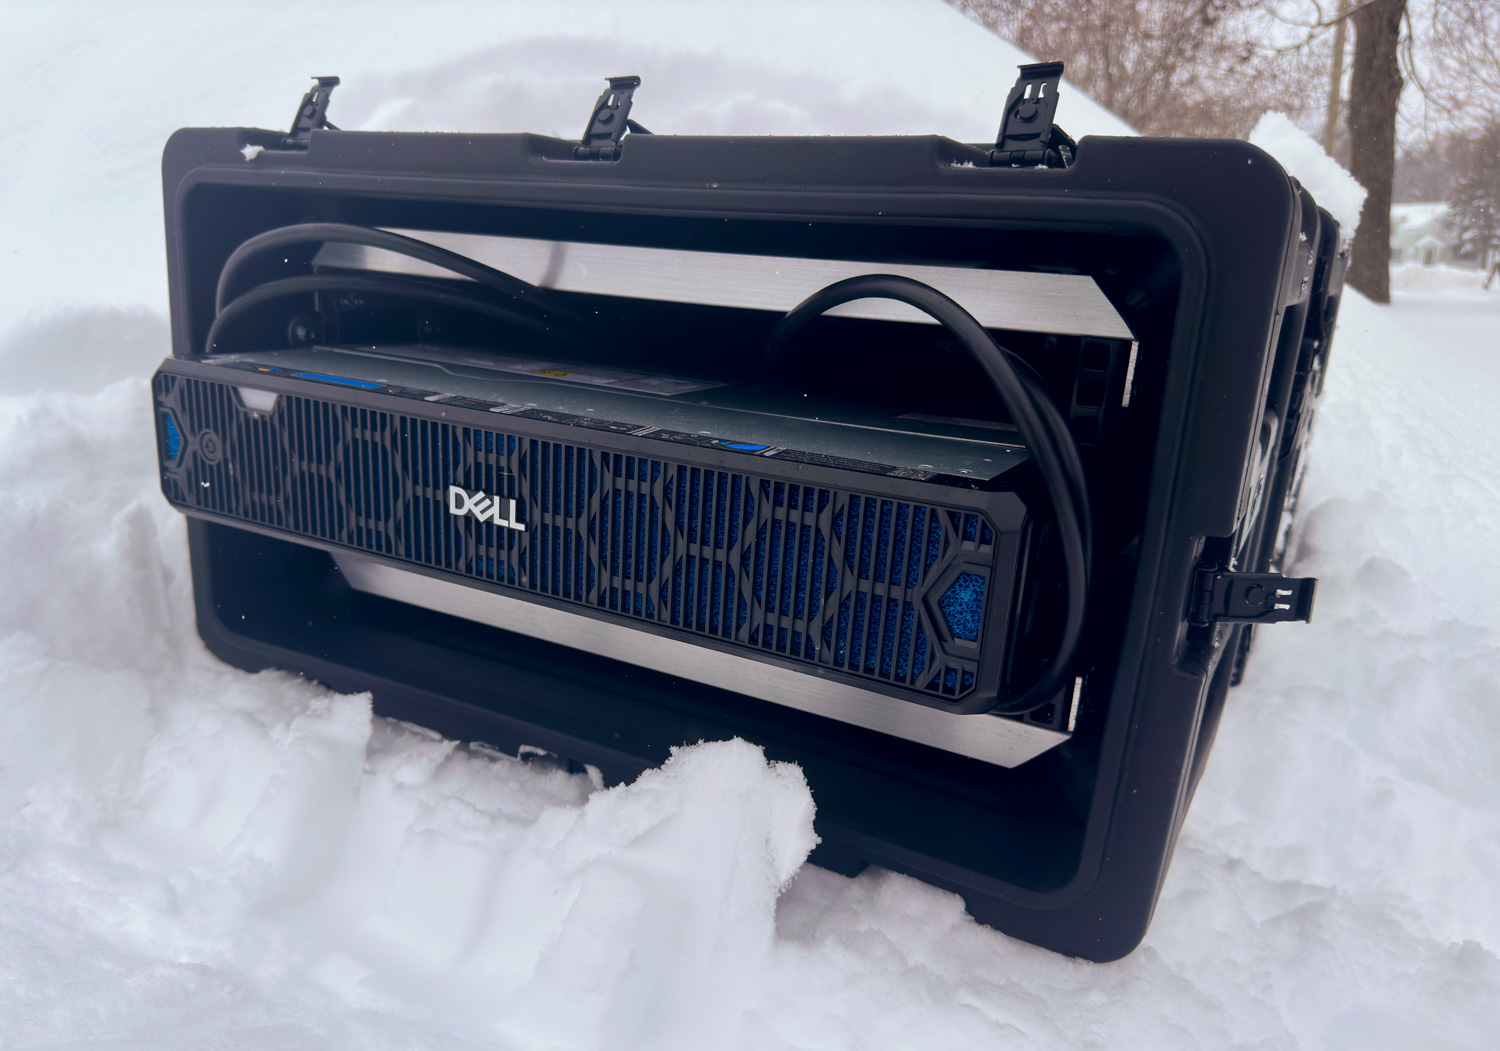 Dell PowerEdge XR7620 in the snow